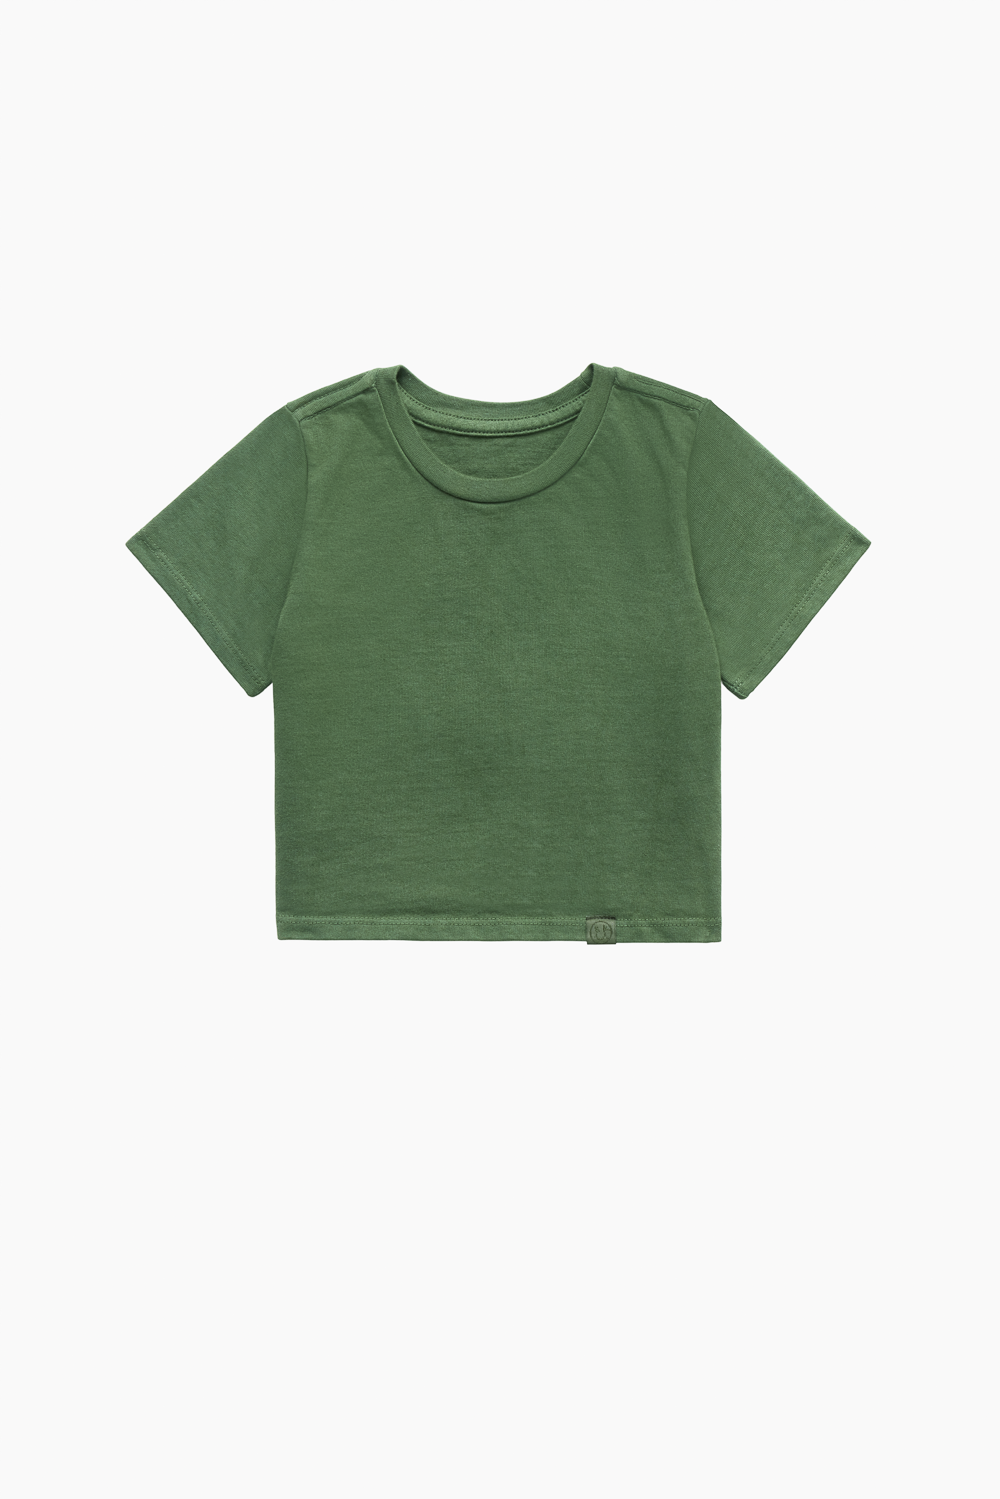 HEAVY COTTON KIDS EVERYDAY TEE - ROSEMARY Featured Image